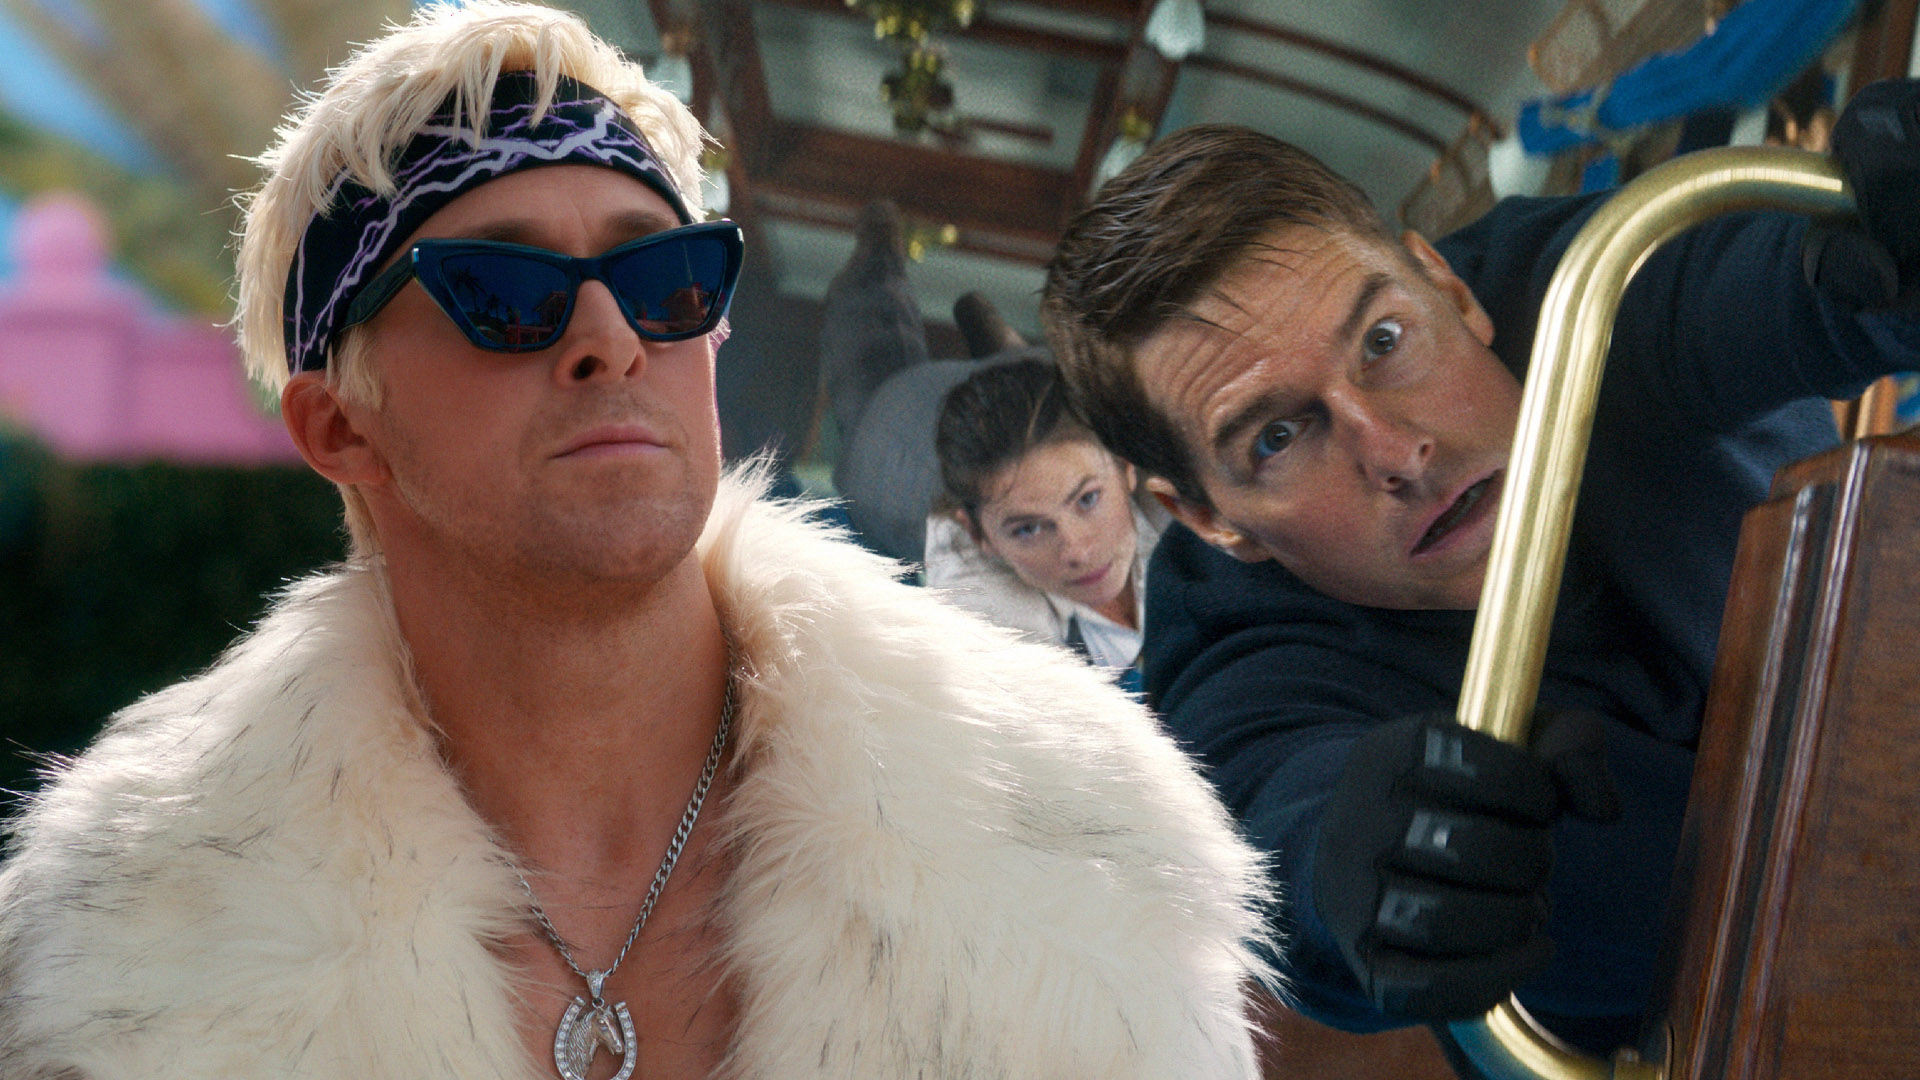 Mission Impossible 7 Fizzles Out at Box Office, and It's All Barbie's Fault